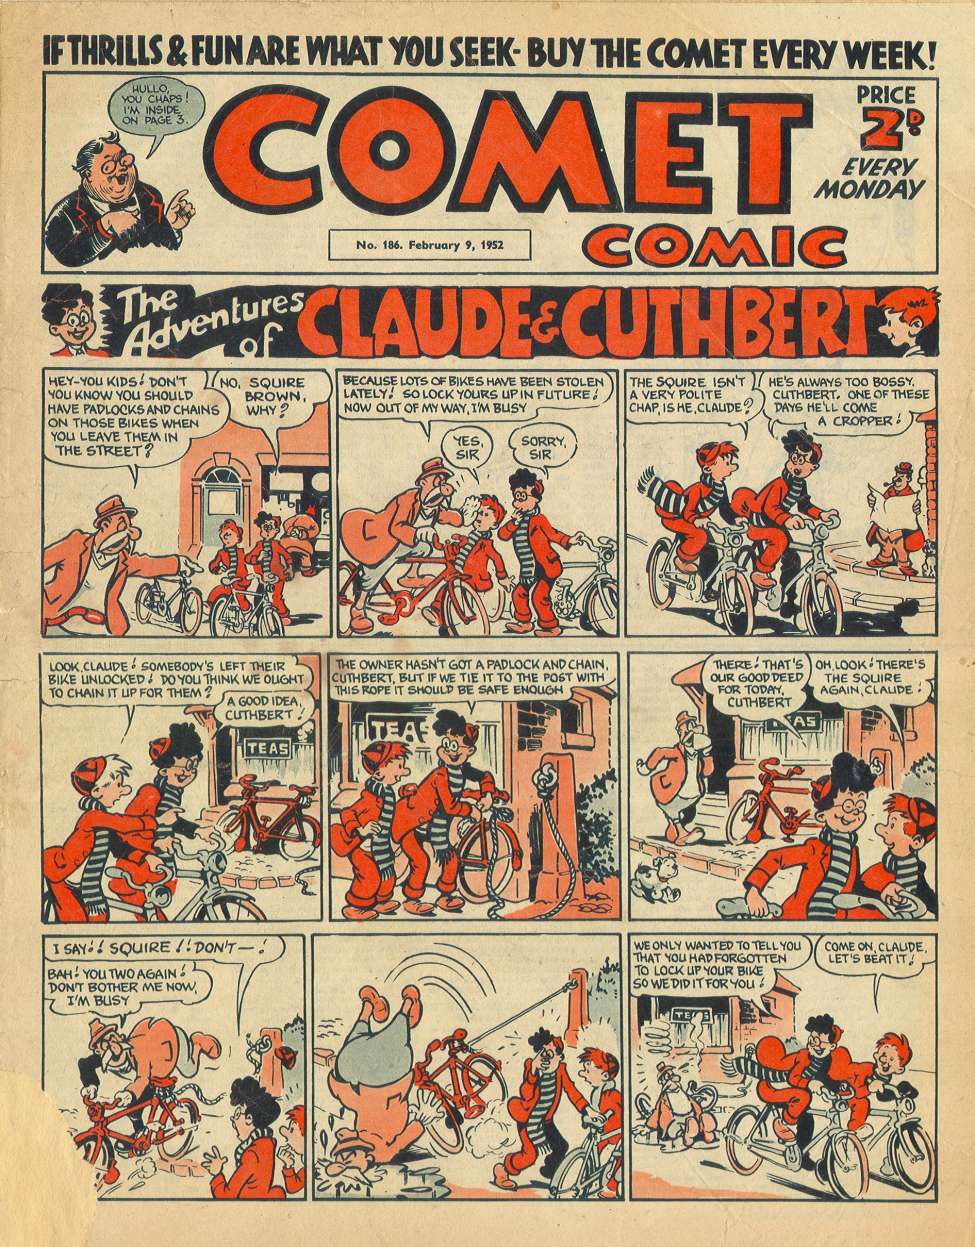 Book Cover For The Comet 186